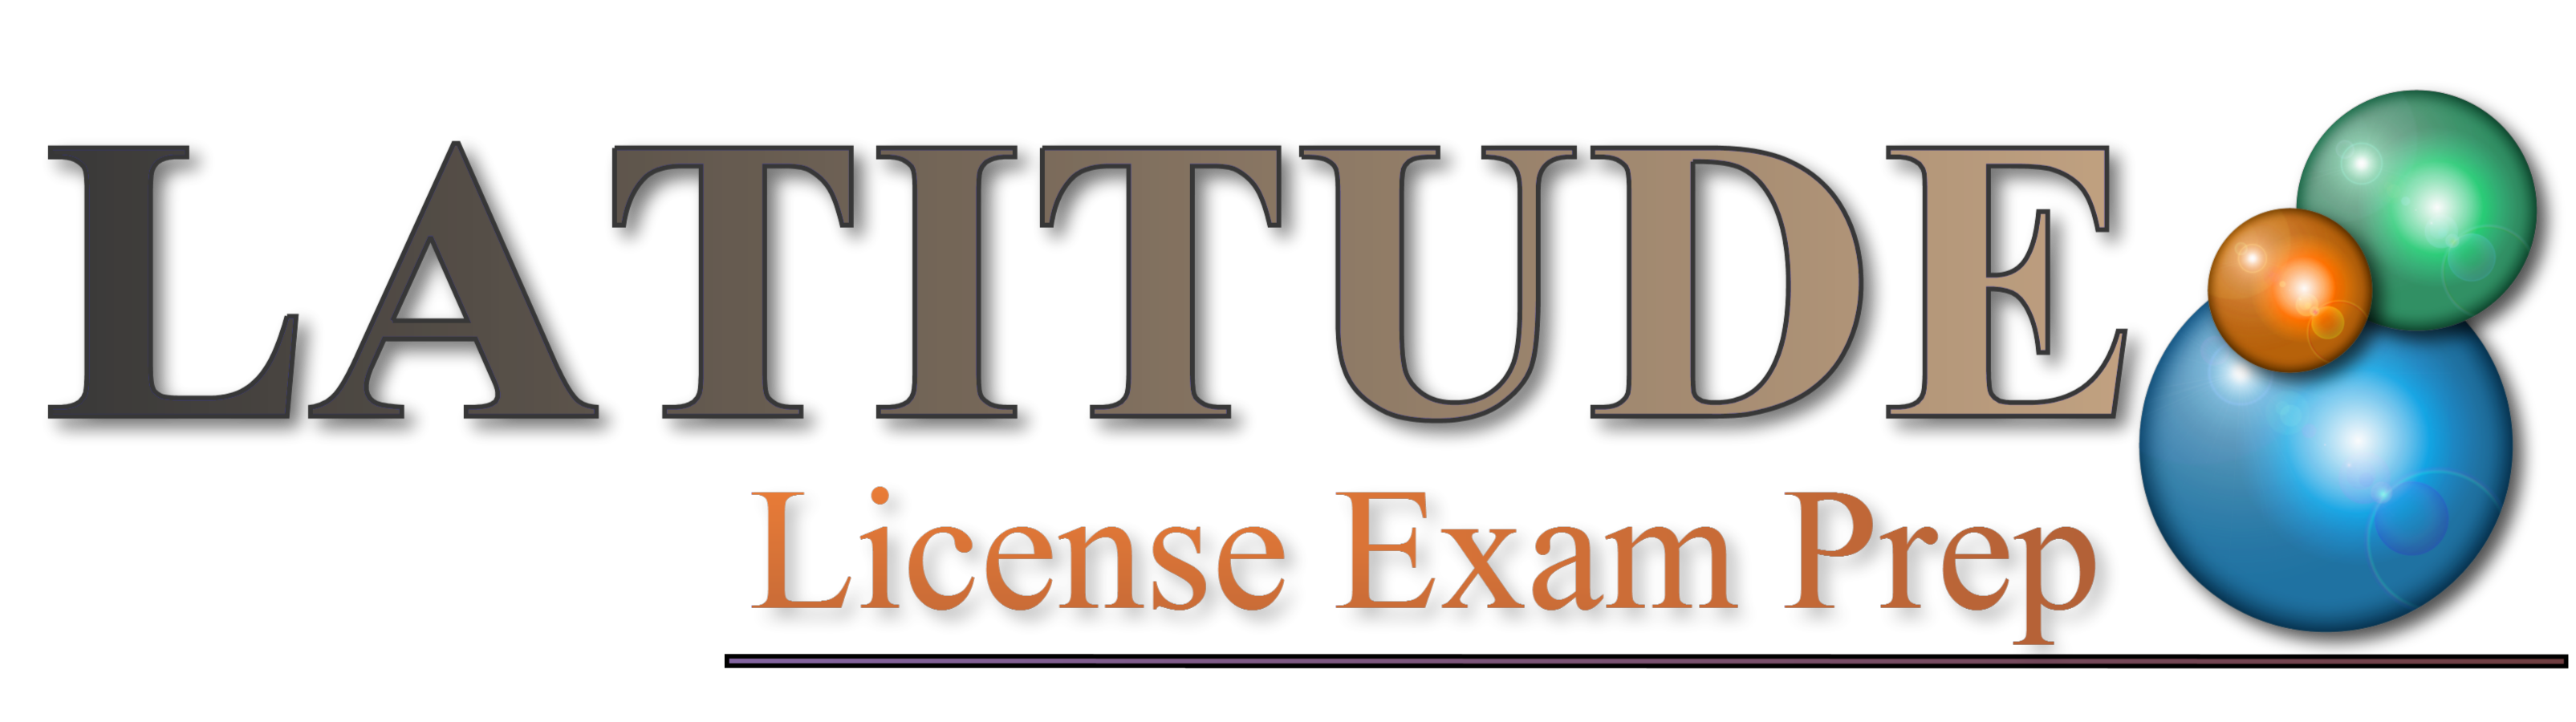 Sign In for Internet Insurance License Exam Test Prep Course